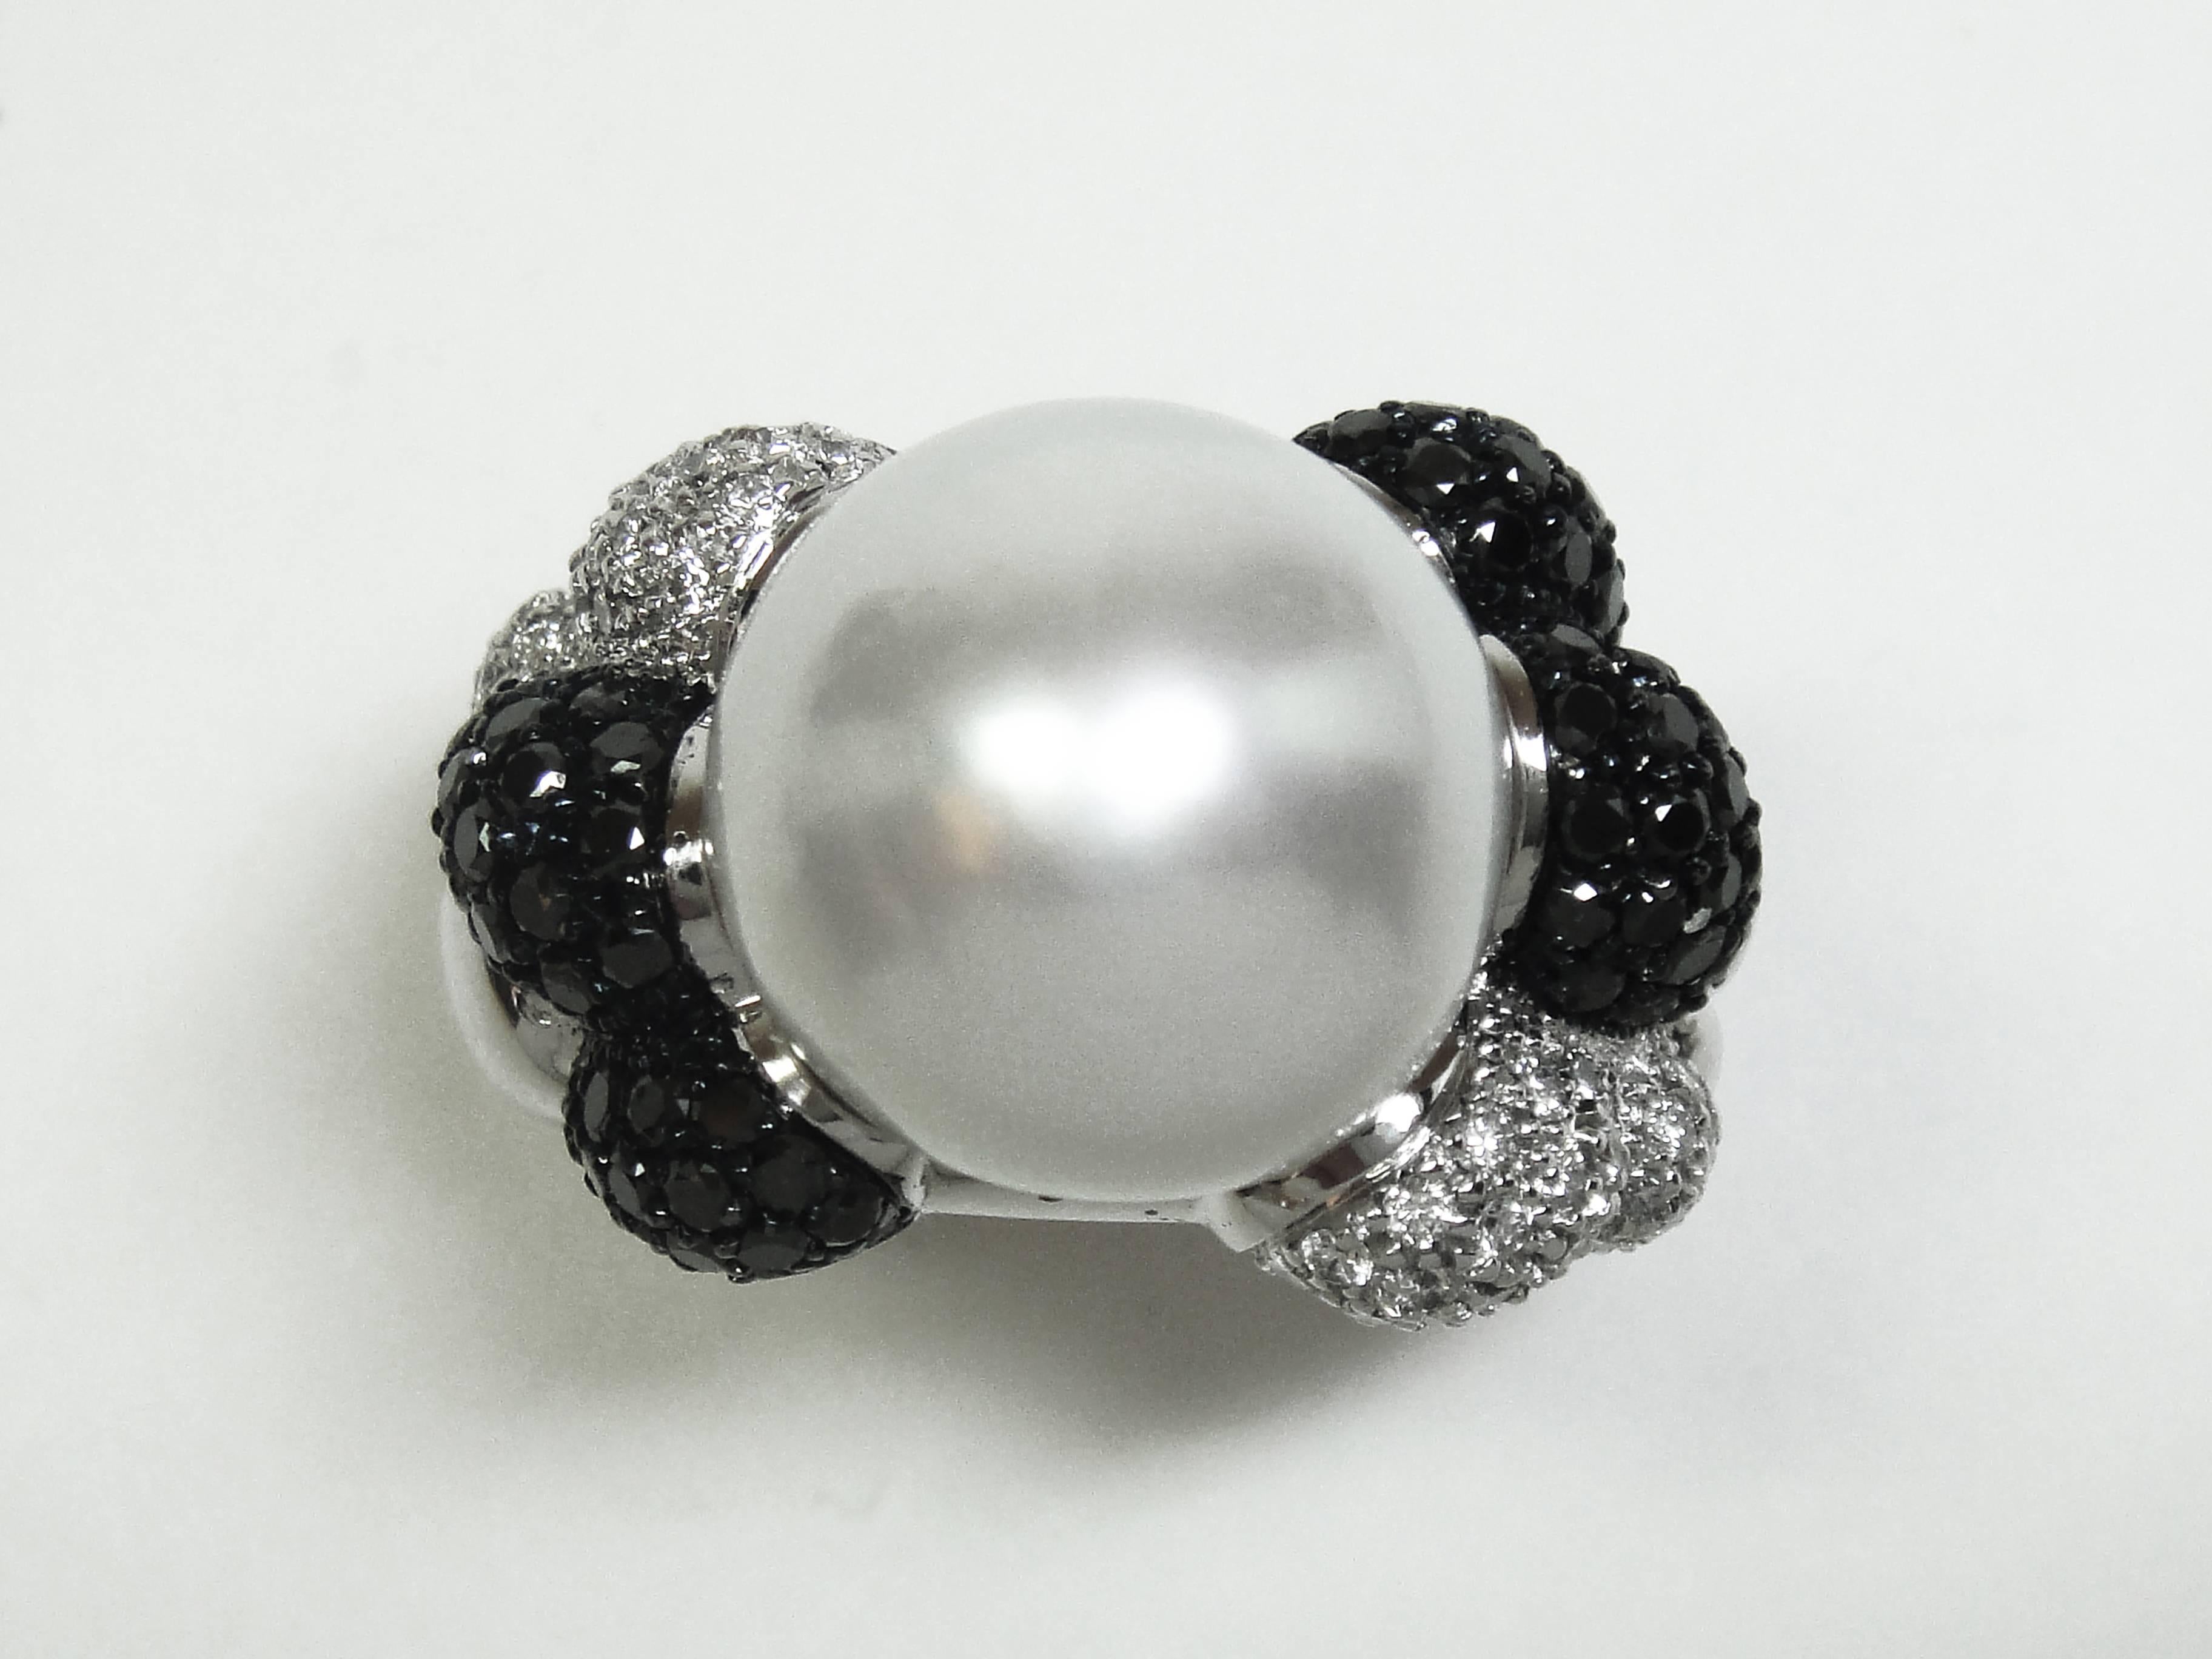 This cocktail ring is handcrafted in white 19.2K gold with a beautiful South Sea Cultured Pearl and set with black and white diamonds. This piece is designed by Monseo and manufactured by Monseo artisans in Porto, Portugal.

Currently out of stock.